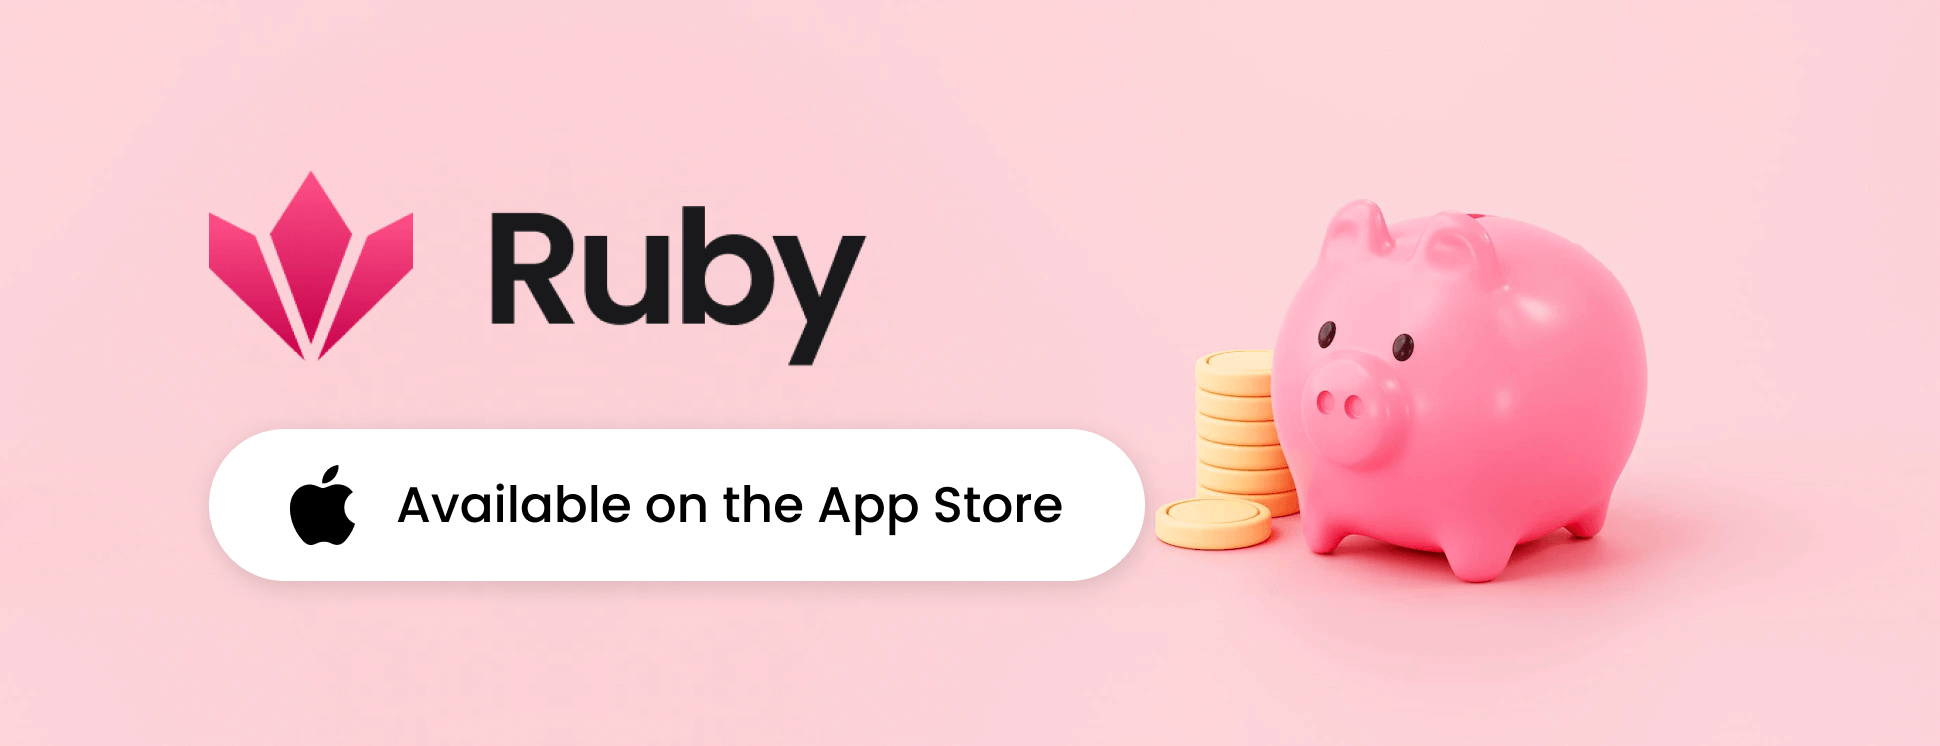 Ruby is available on the App Stroe